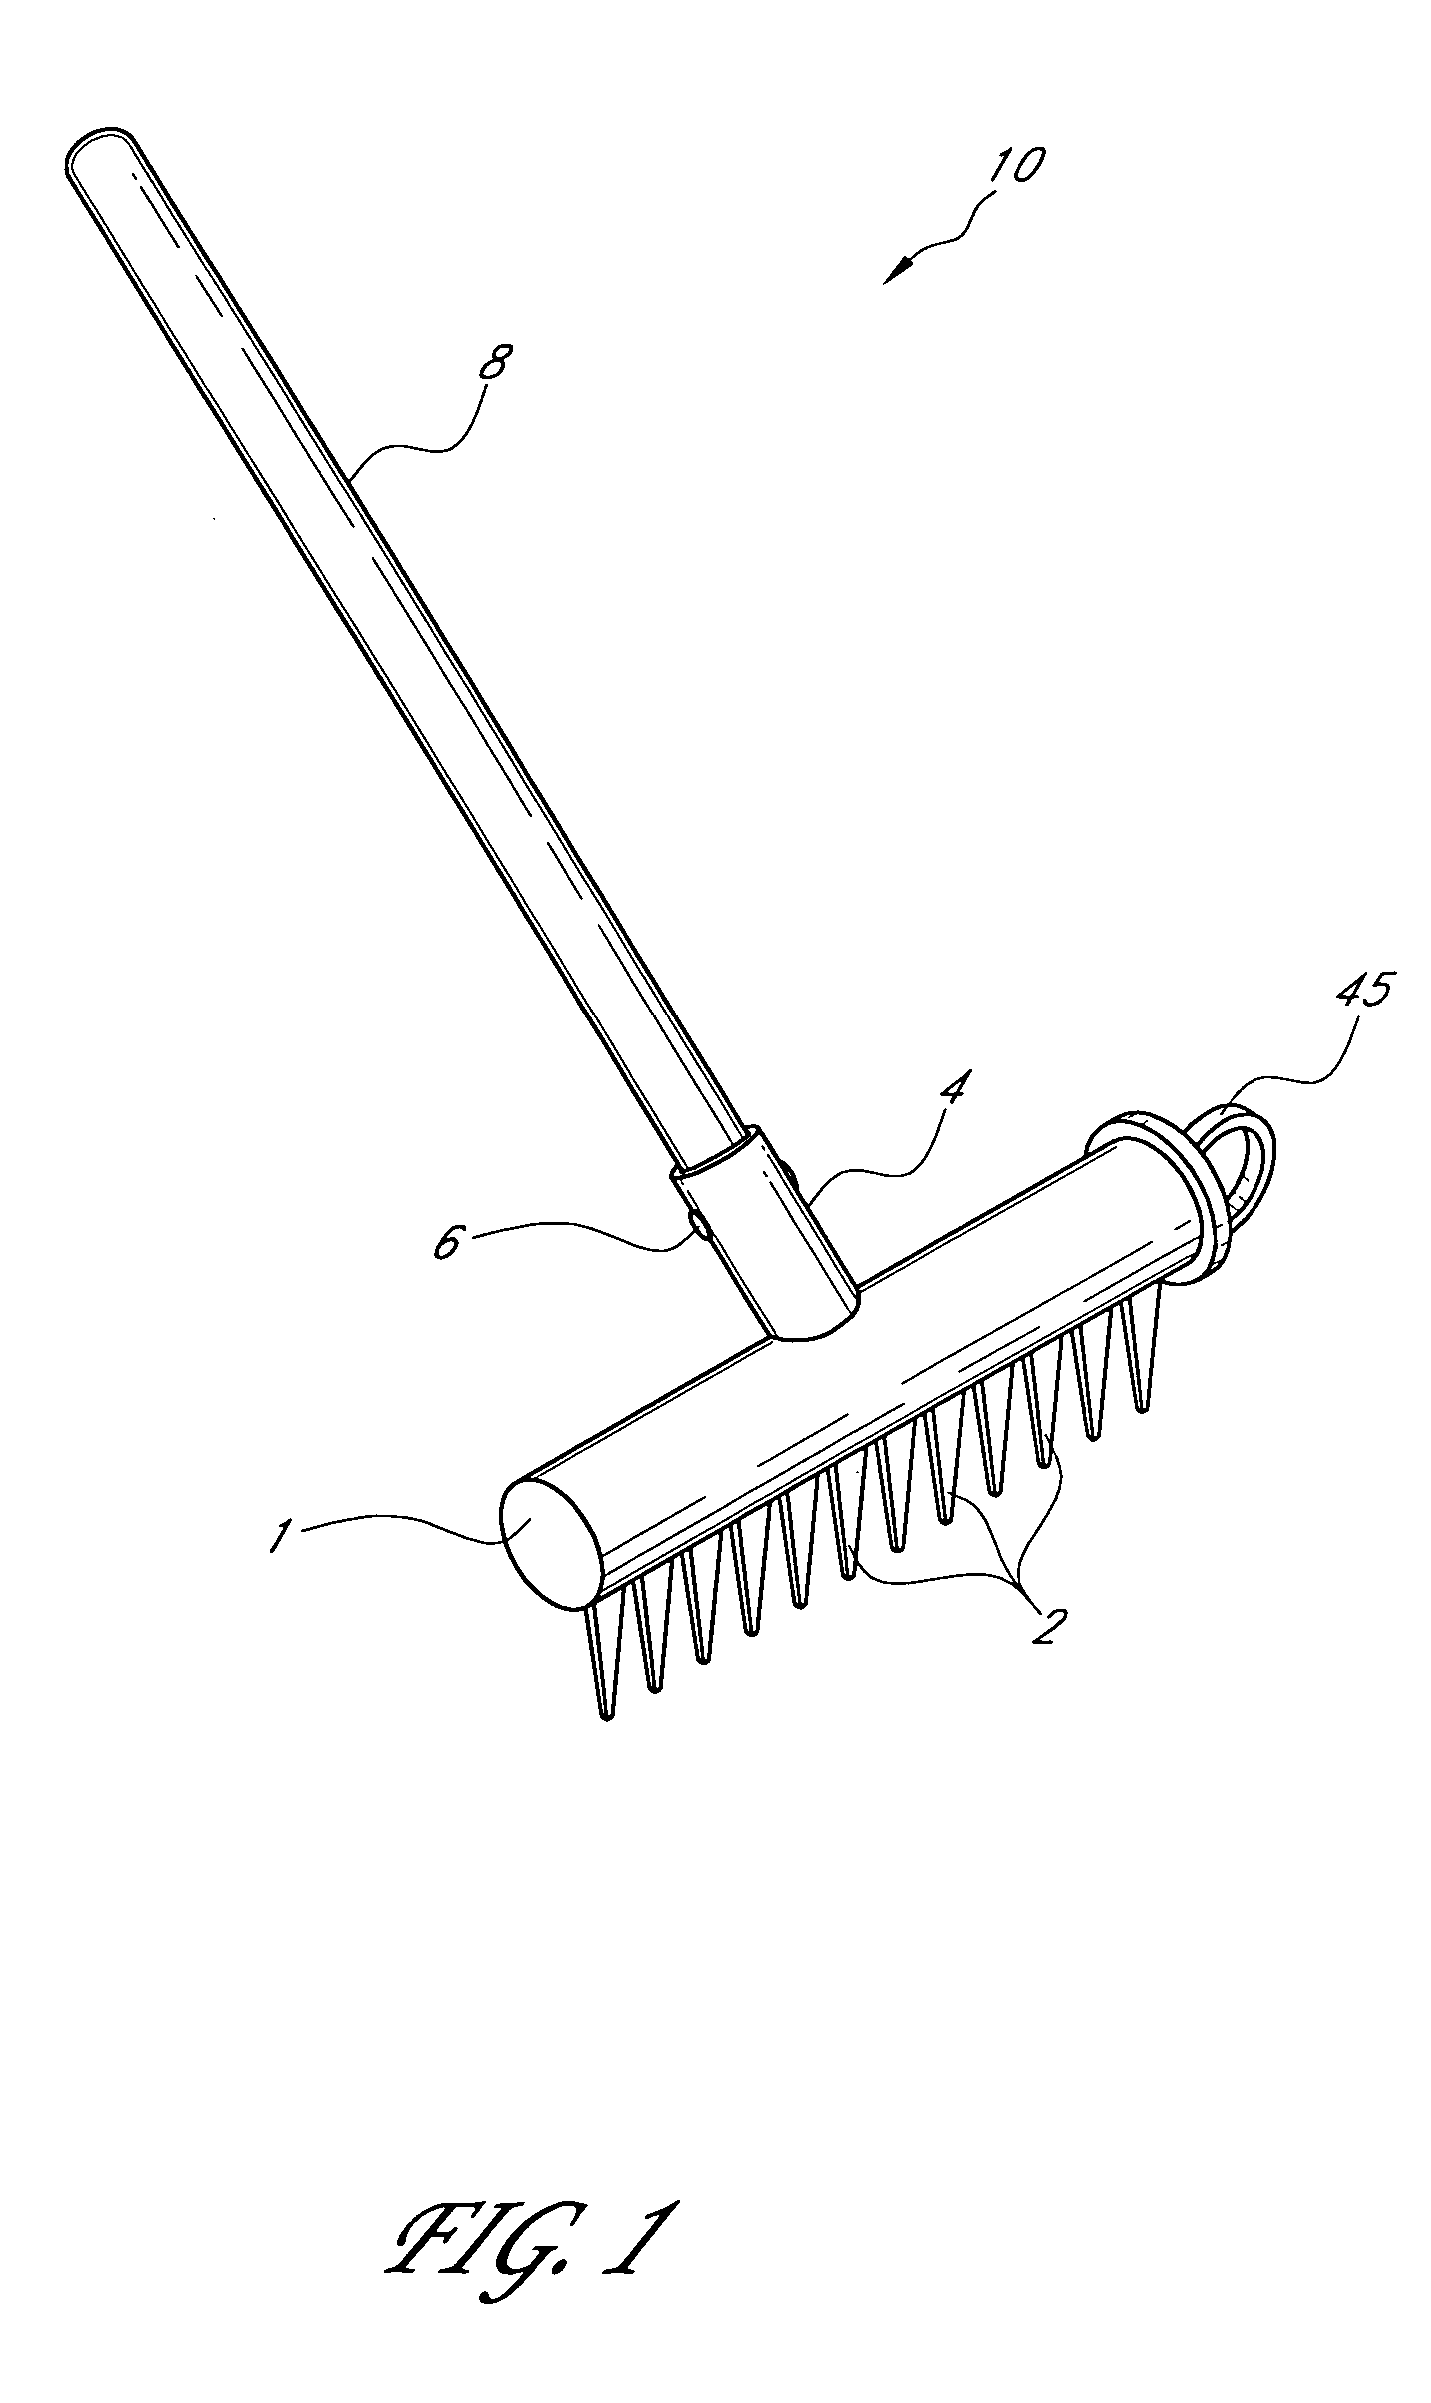 Magnetic rake with release mechanism